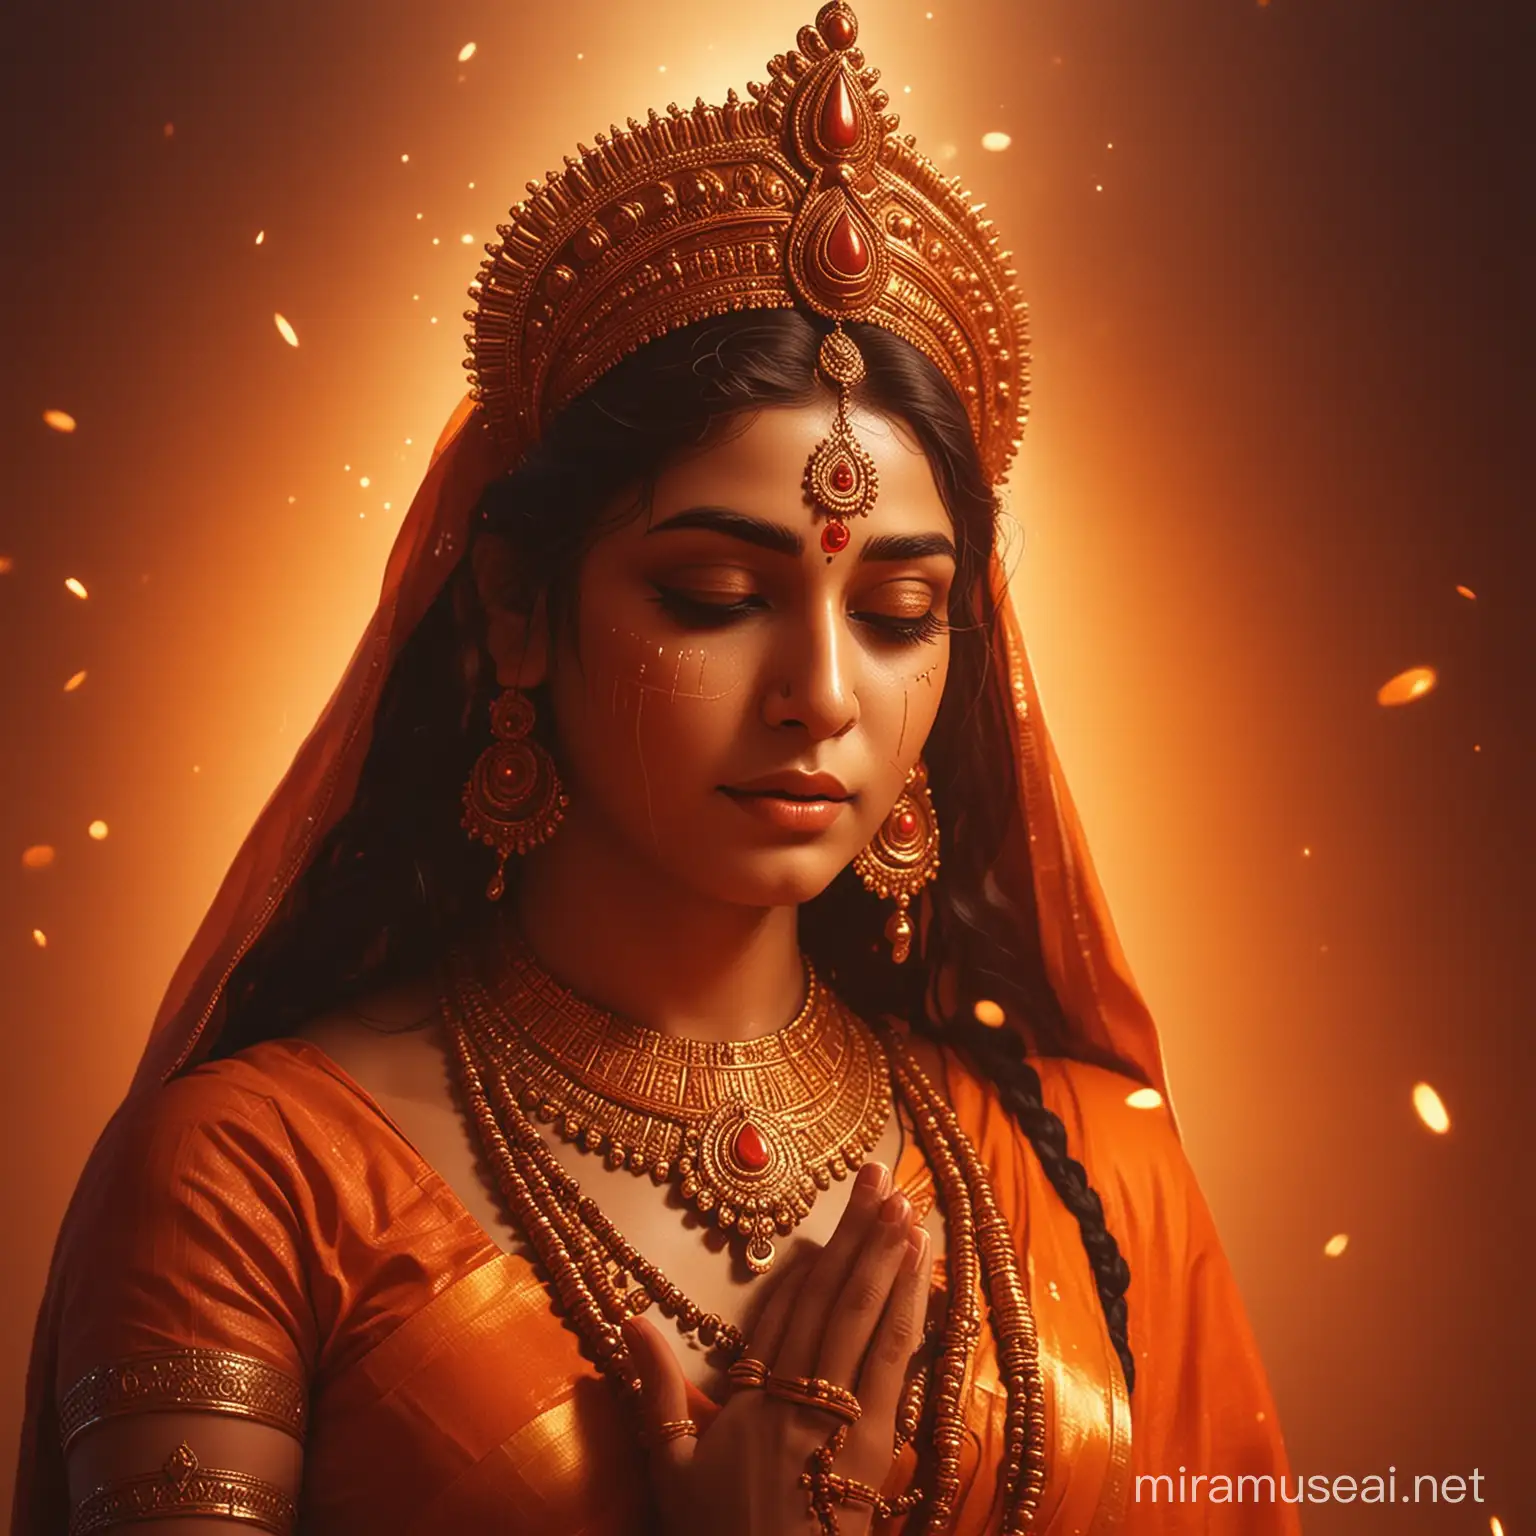 Durga Mata Blessing a Man in Cinematic Scene with Orange Backlighting